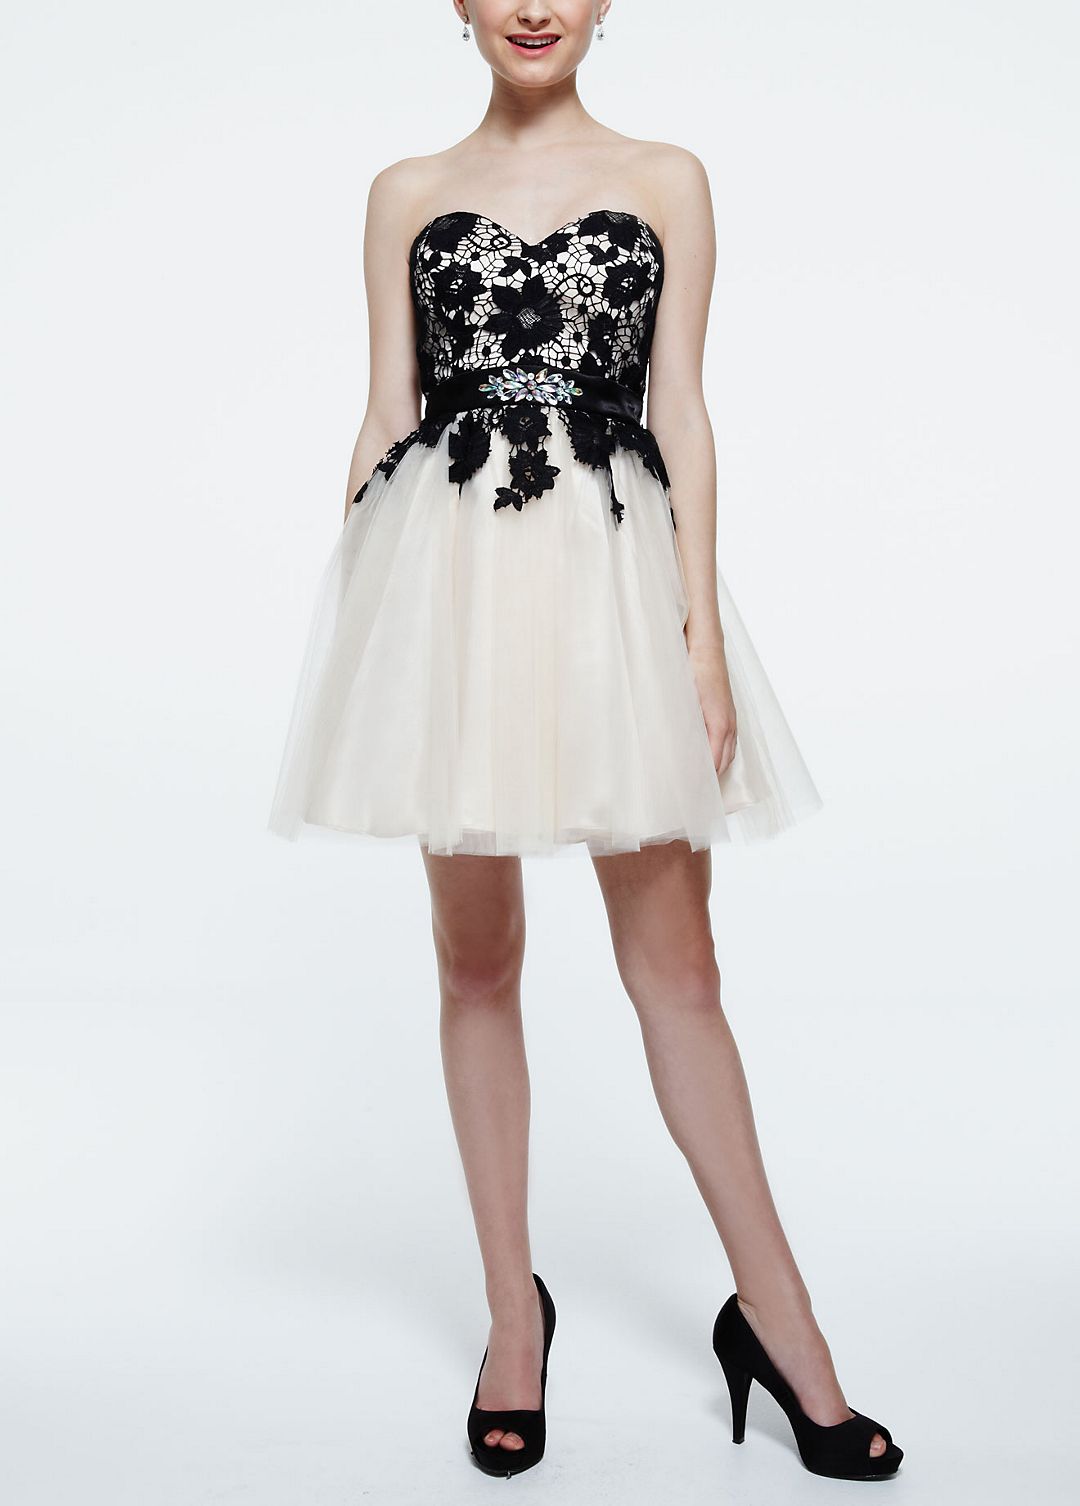 Strapless Lace Applique Tulle Dress with Belt Image 1